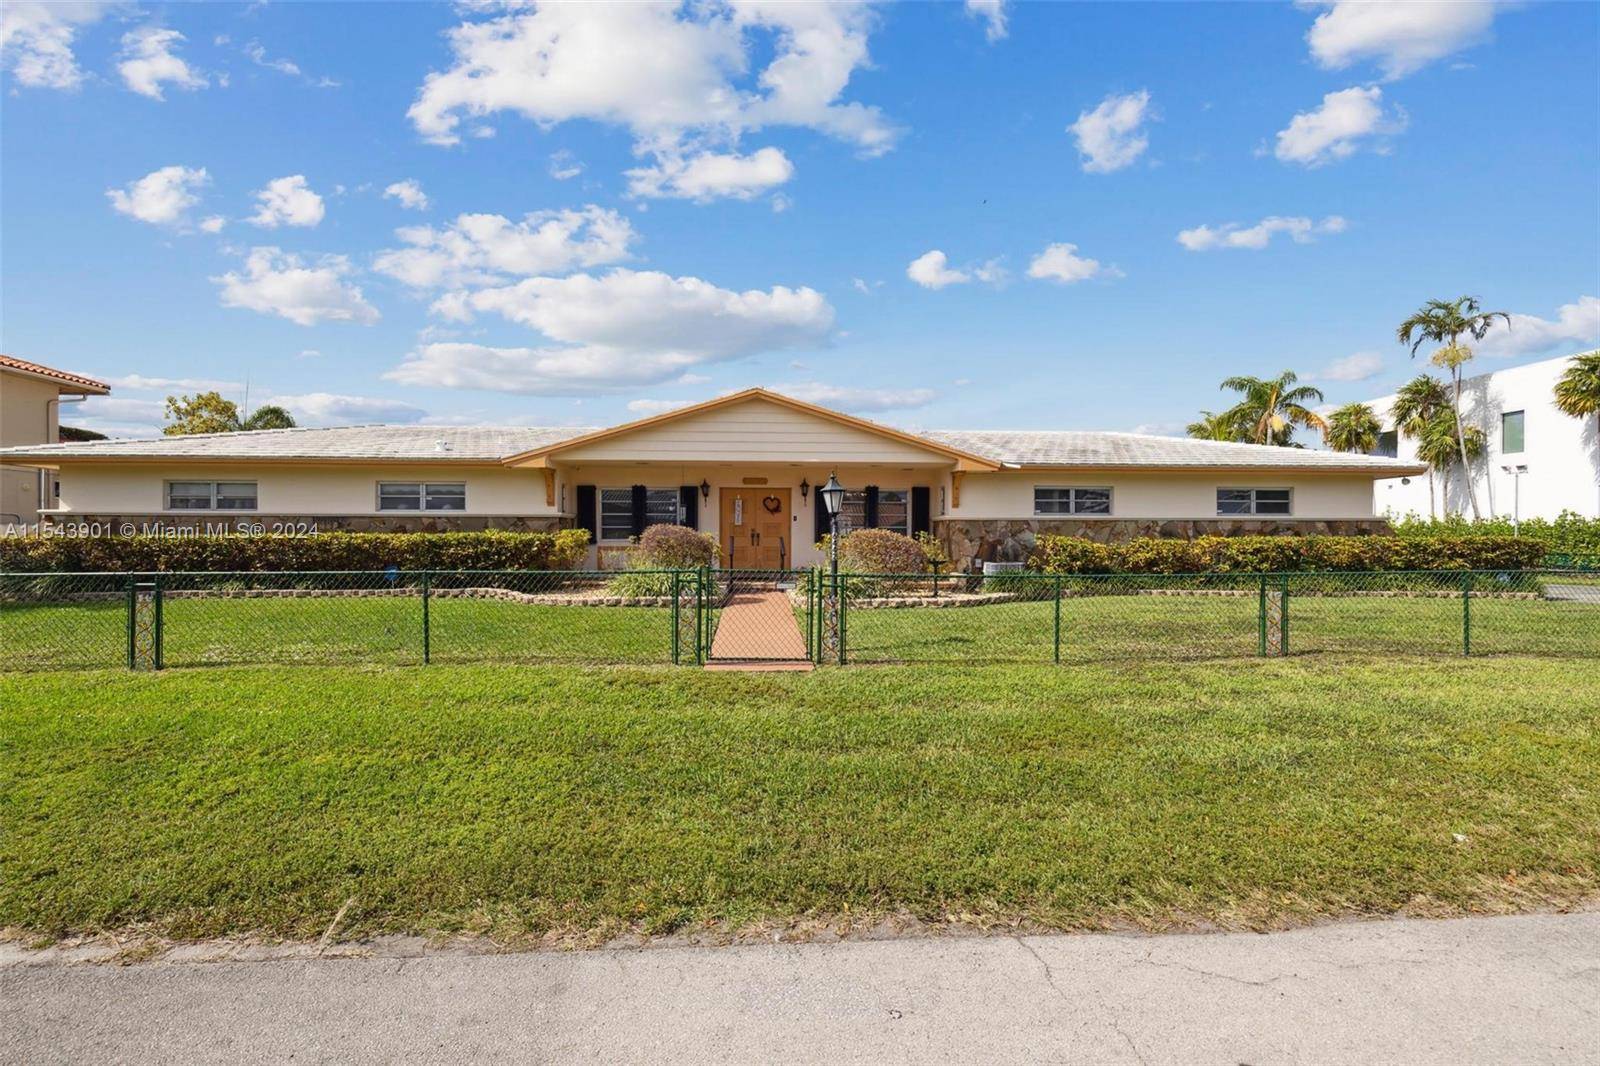 Spectacular opportunity to own this 5bedrooms 3bathrooms home on private cul de sac street in a gated community in the desirable Eastern Shores Neighborhood.